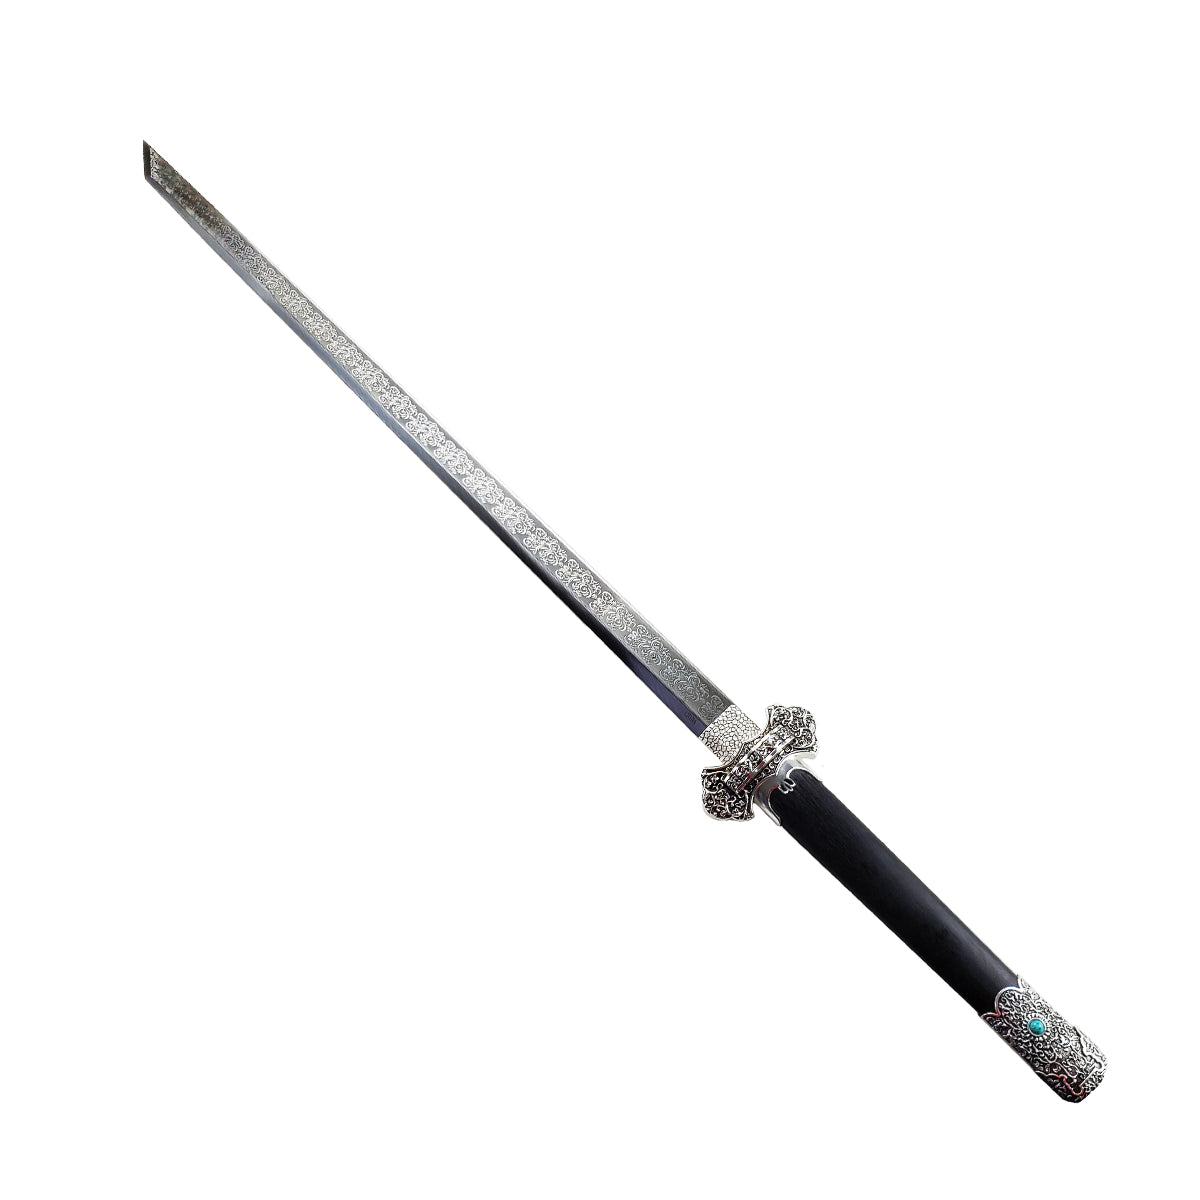 Hand made 1045 High Carbon Tang Dynasty Sword